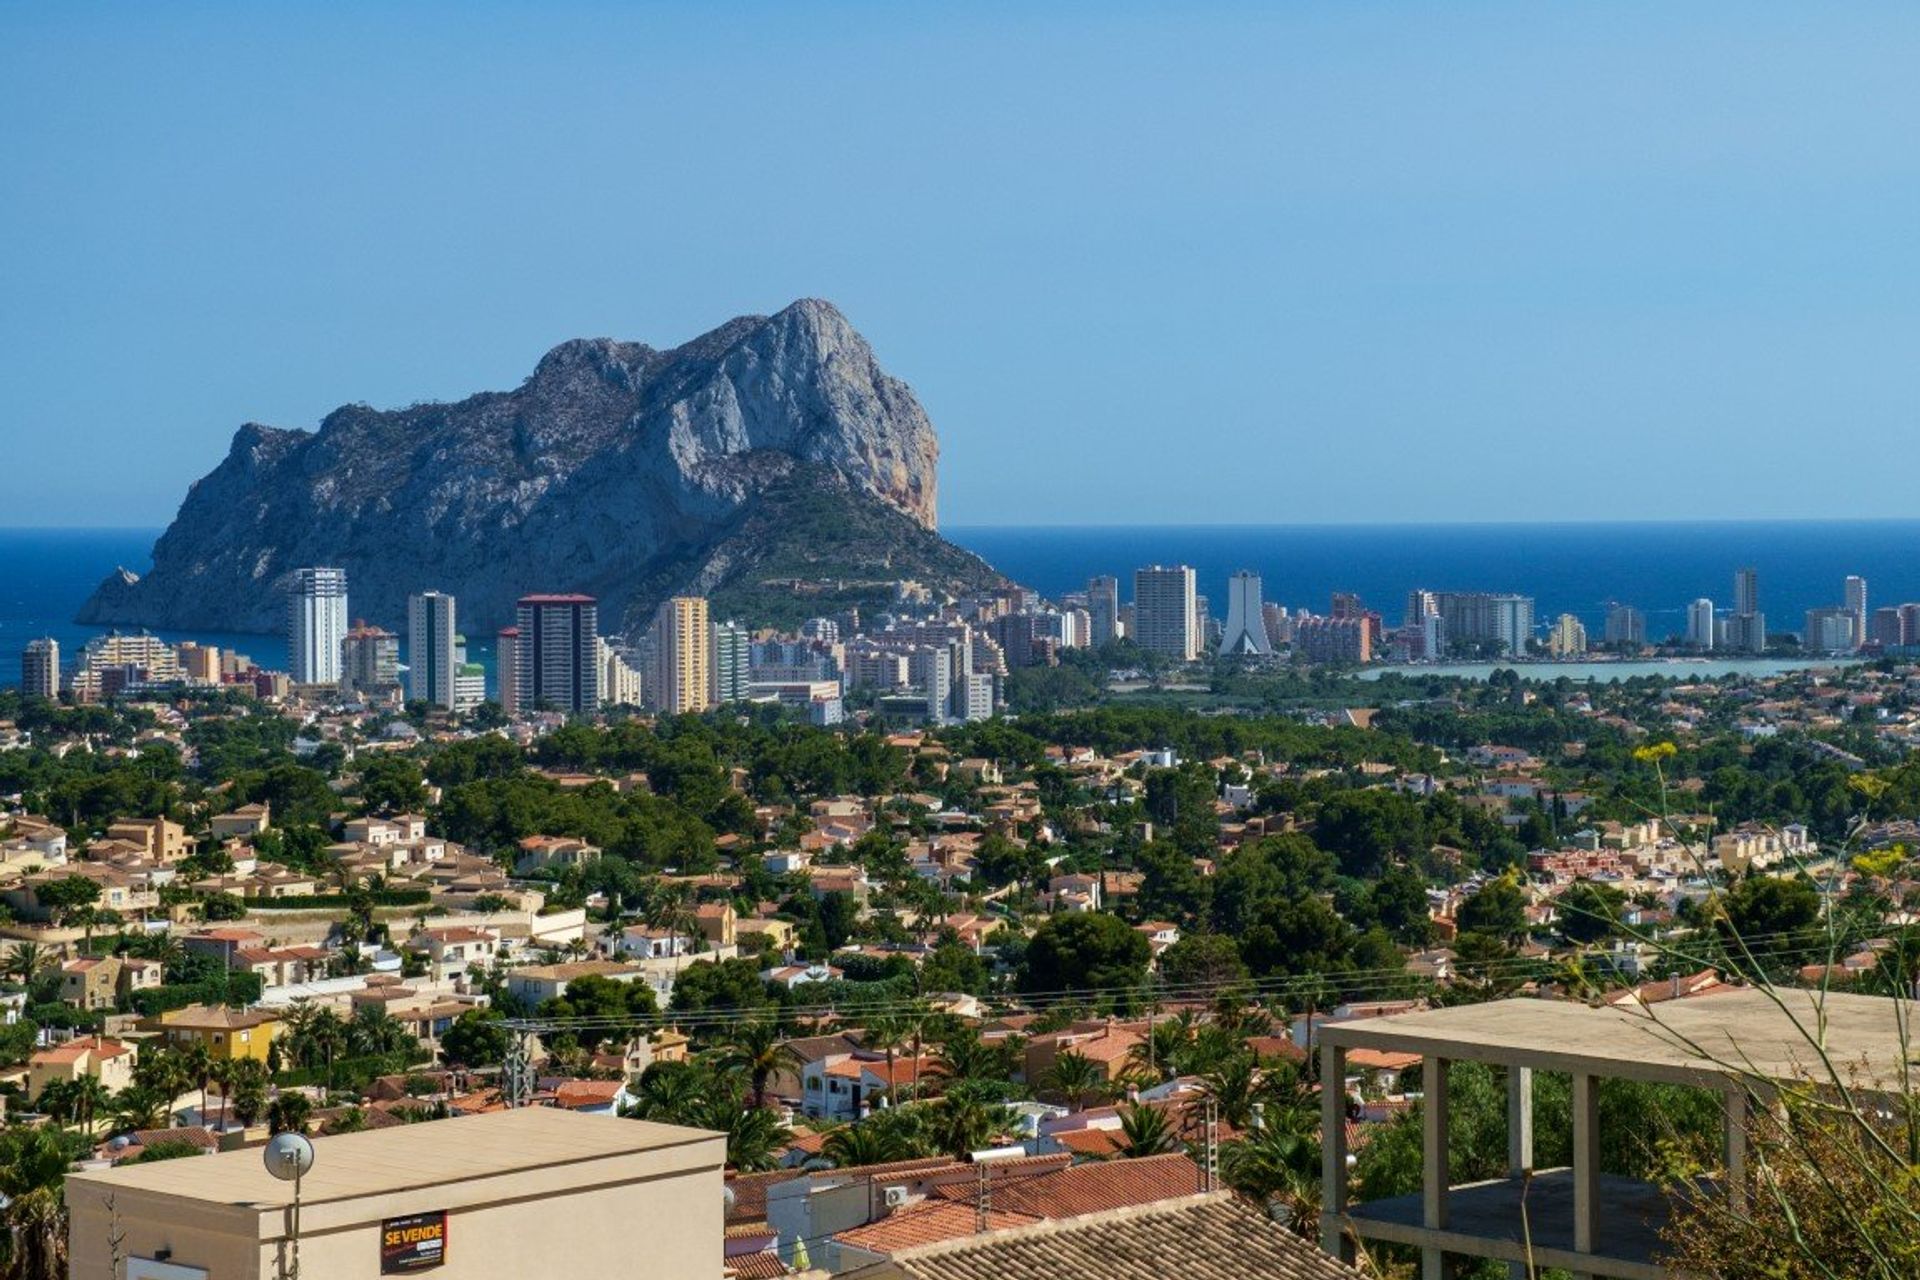 Neighbouring Calpe with the iconic Penon de Ifach Natural Park in the background, just 15 minutes away by car